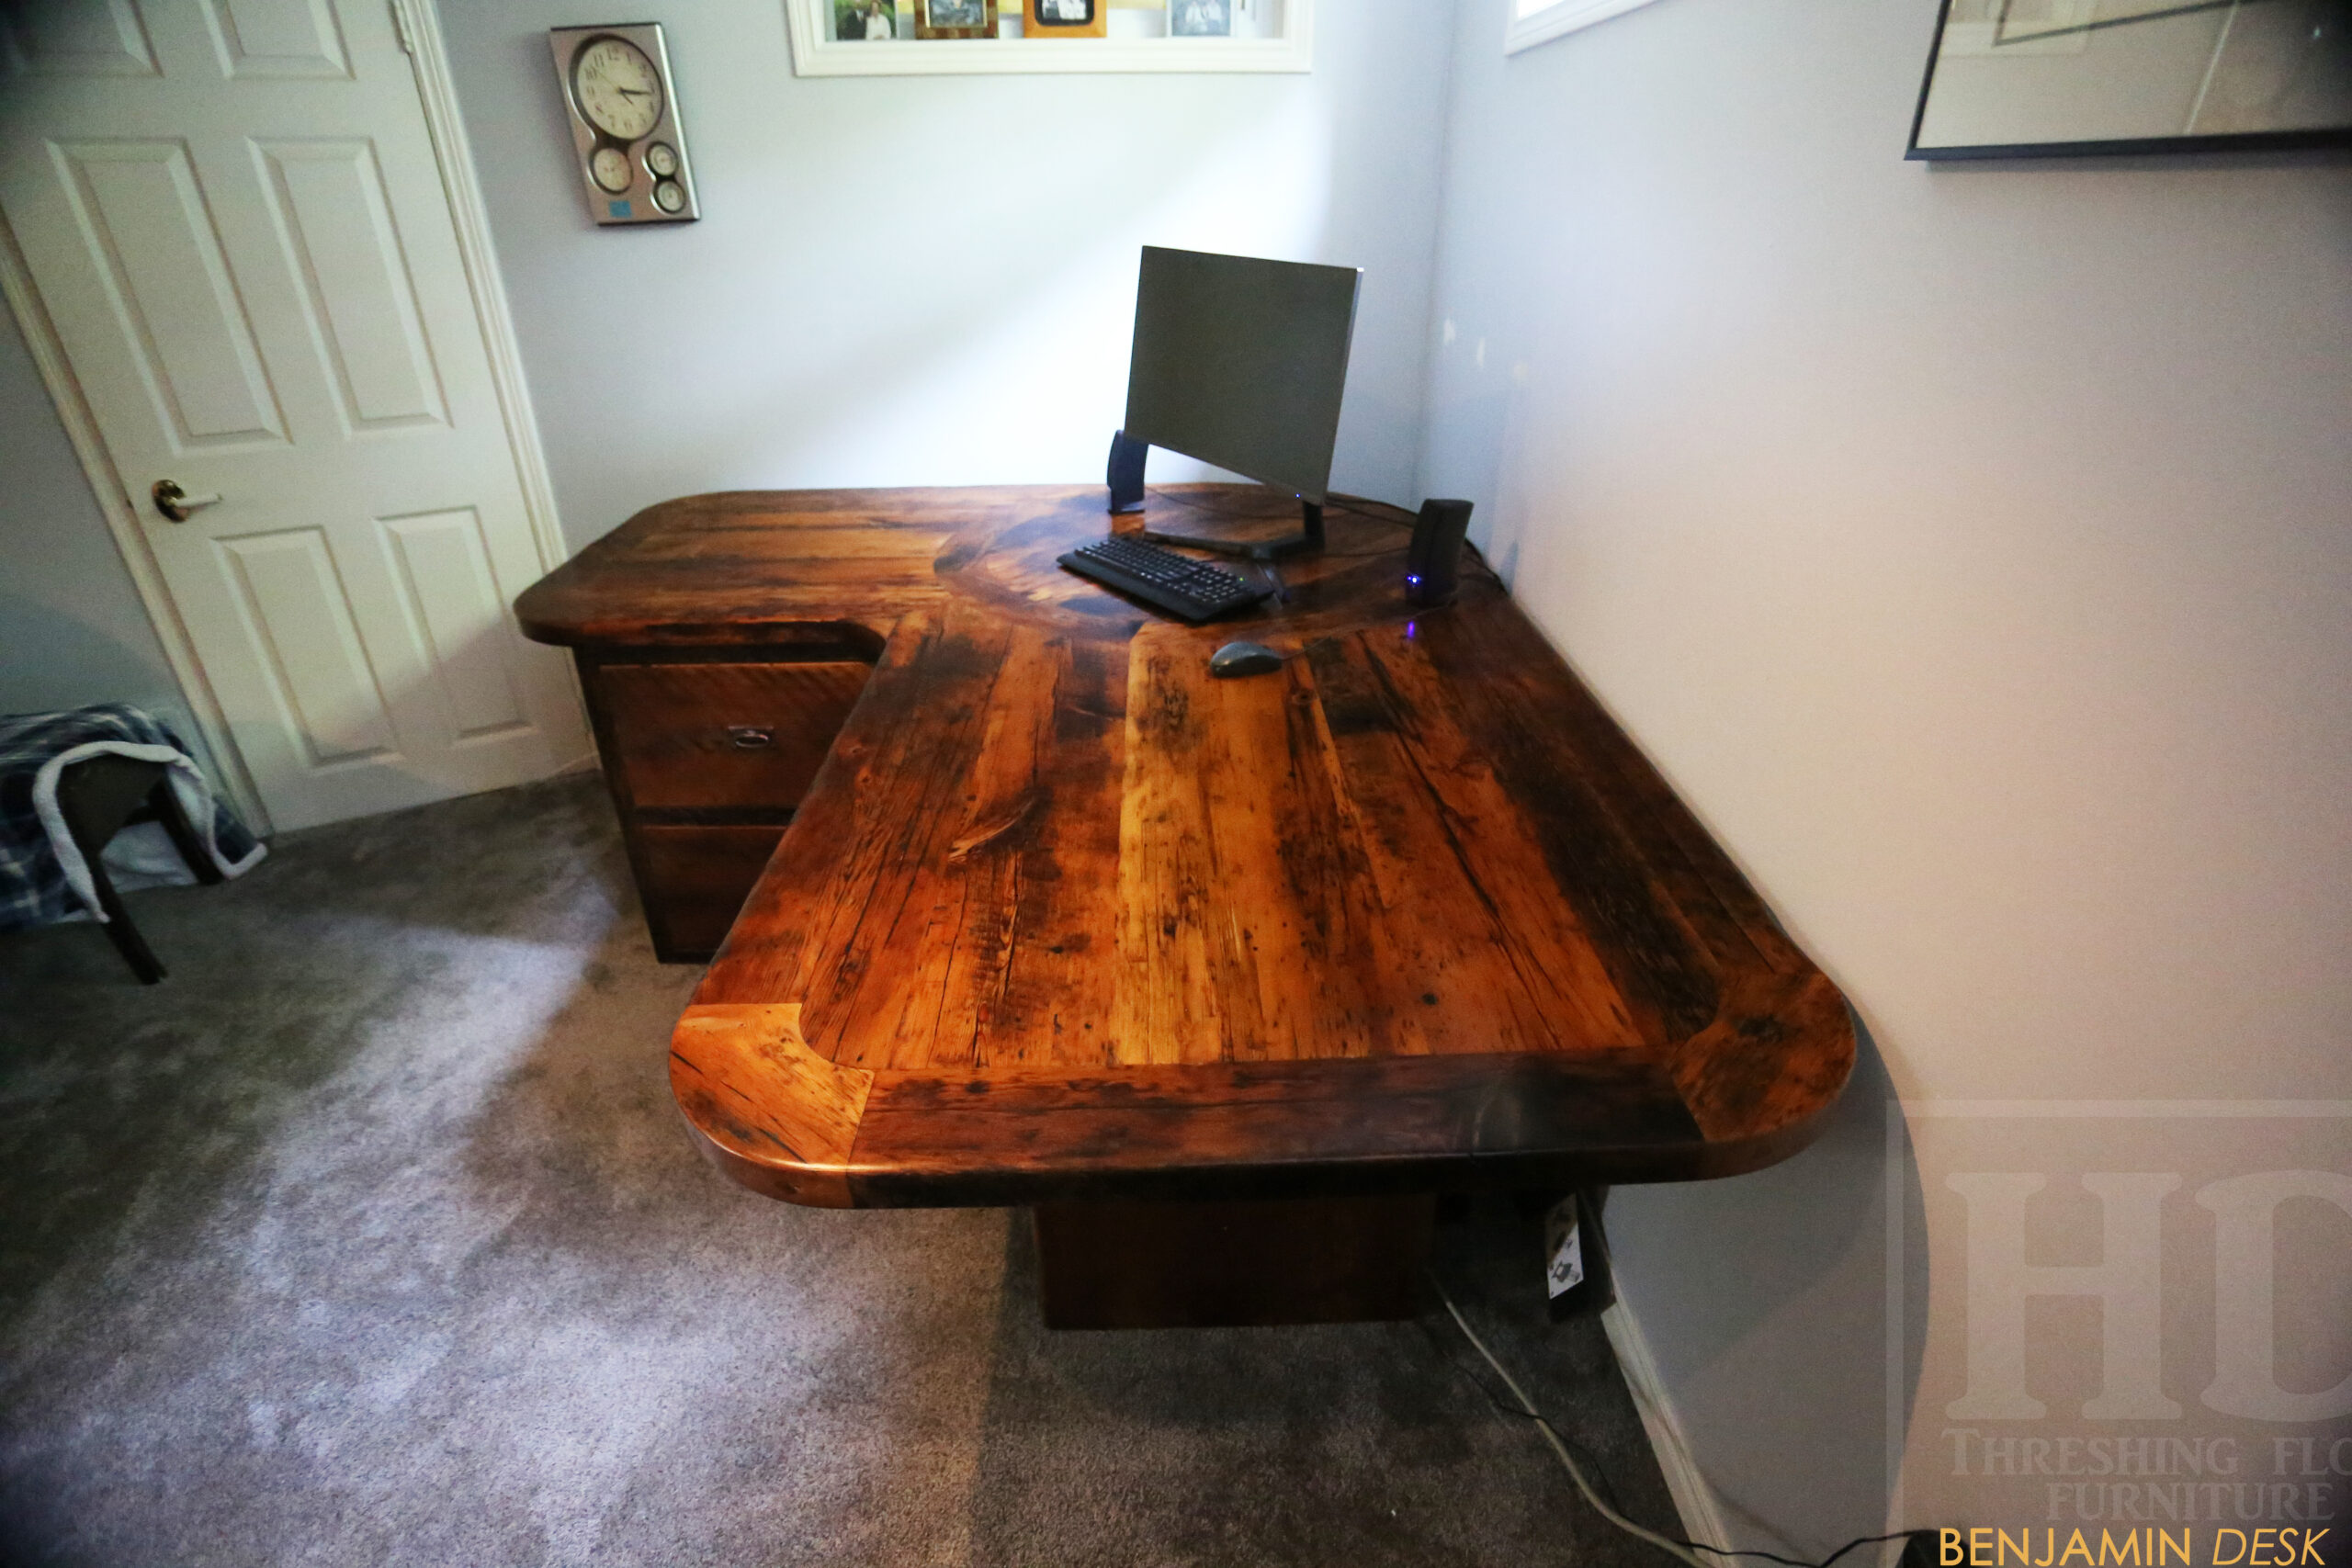 Ontario Barnwood L Shaped Desk we made for a Waterloo, Ontario home office - Reclaimed Hemlock Threshing Floor & Grainery Board Construction – 2 Drawers / Mission Cast Brass Lee Valley Hardware – Plank Post - Original edges & distressing maintained – Premium epoxy + satin polyurethane finish - www.table.ca